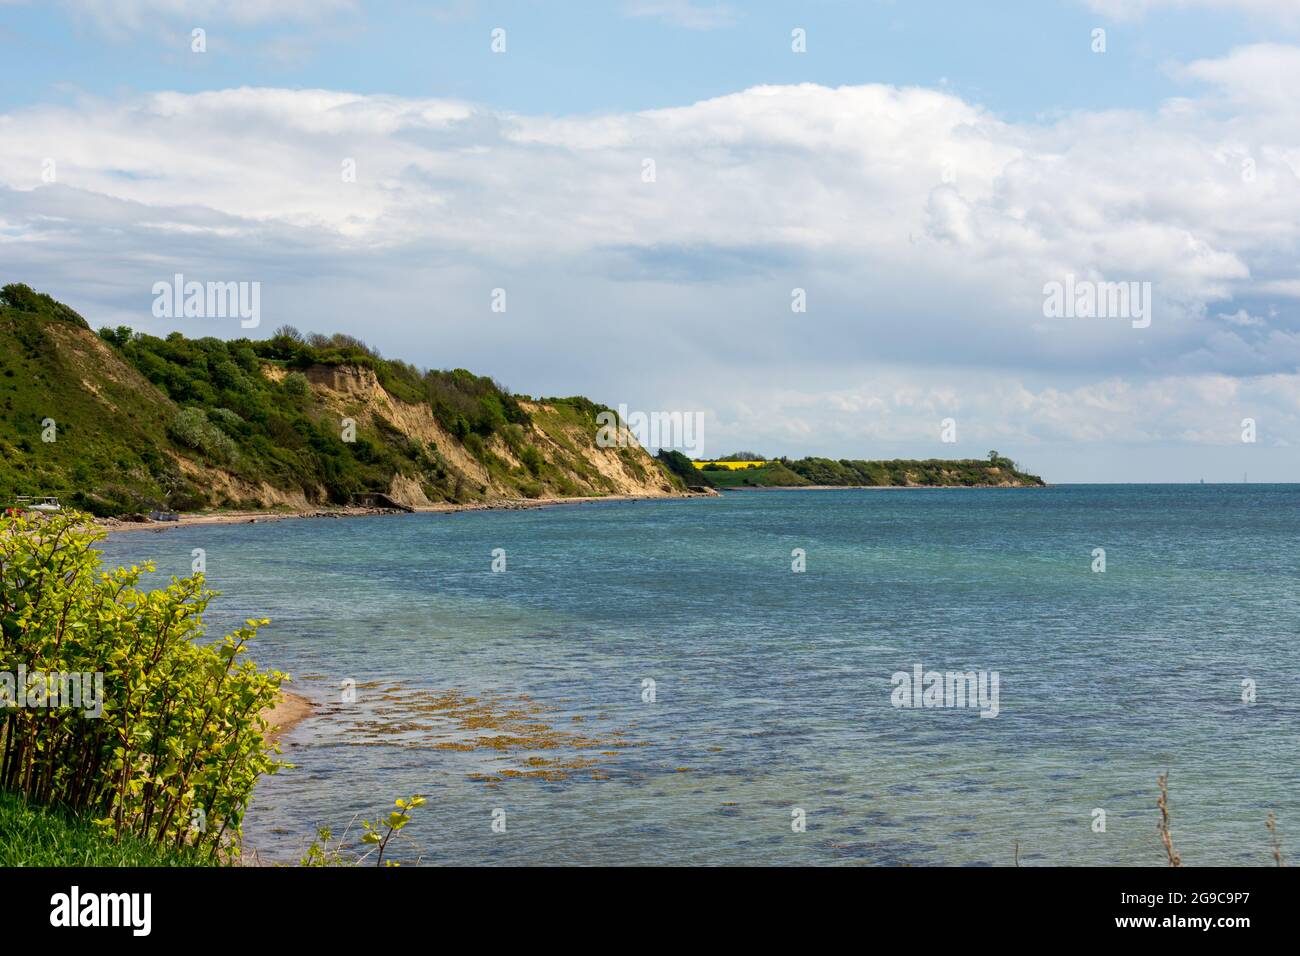 Coastline of the island Ven as seen on the west side of the island Stock Photo